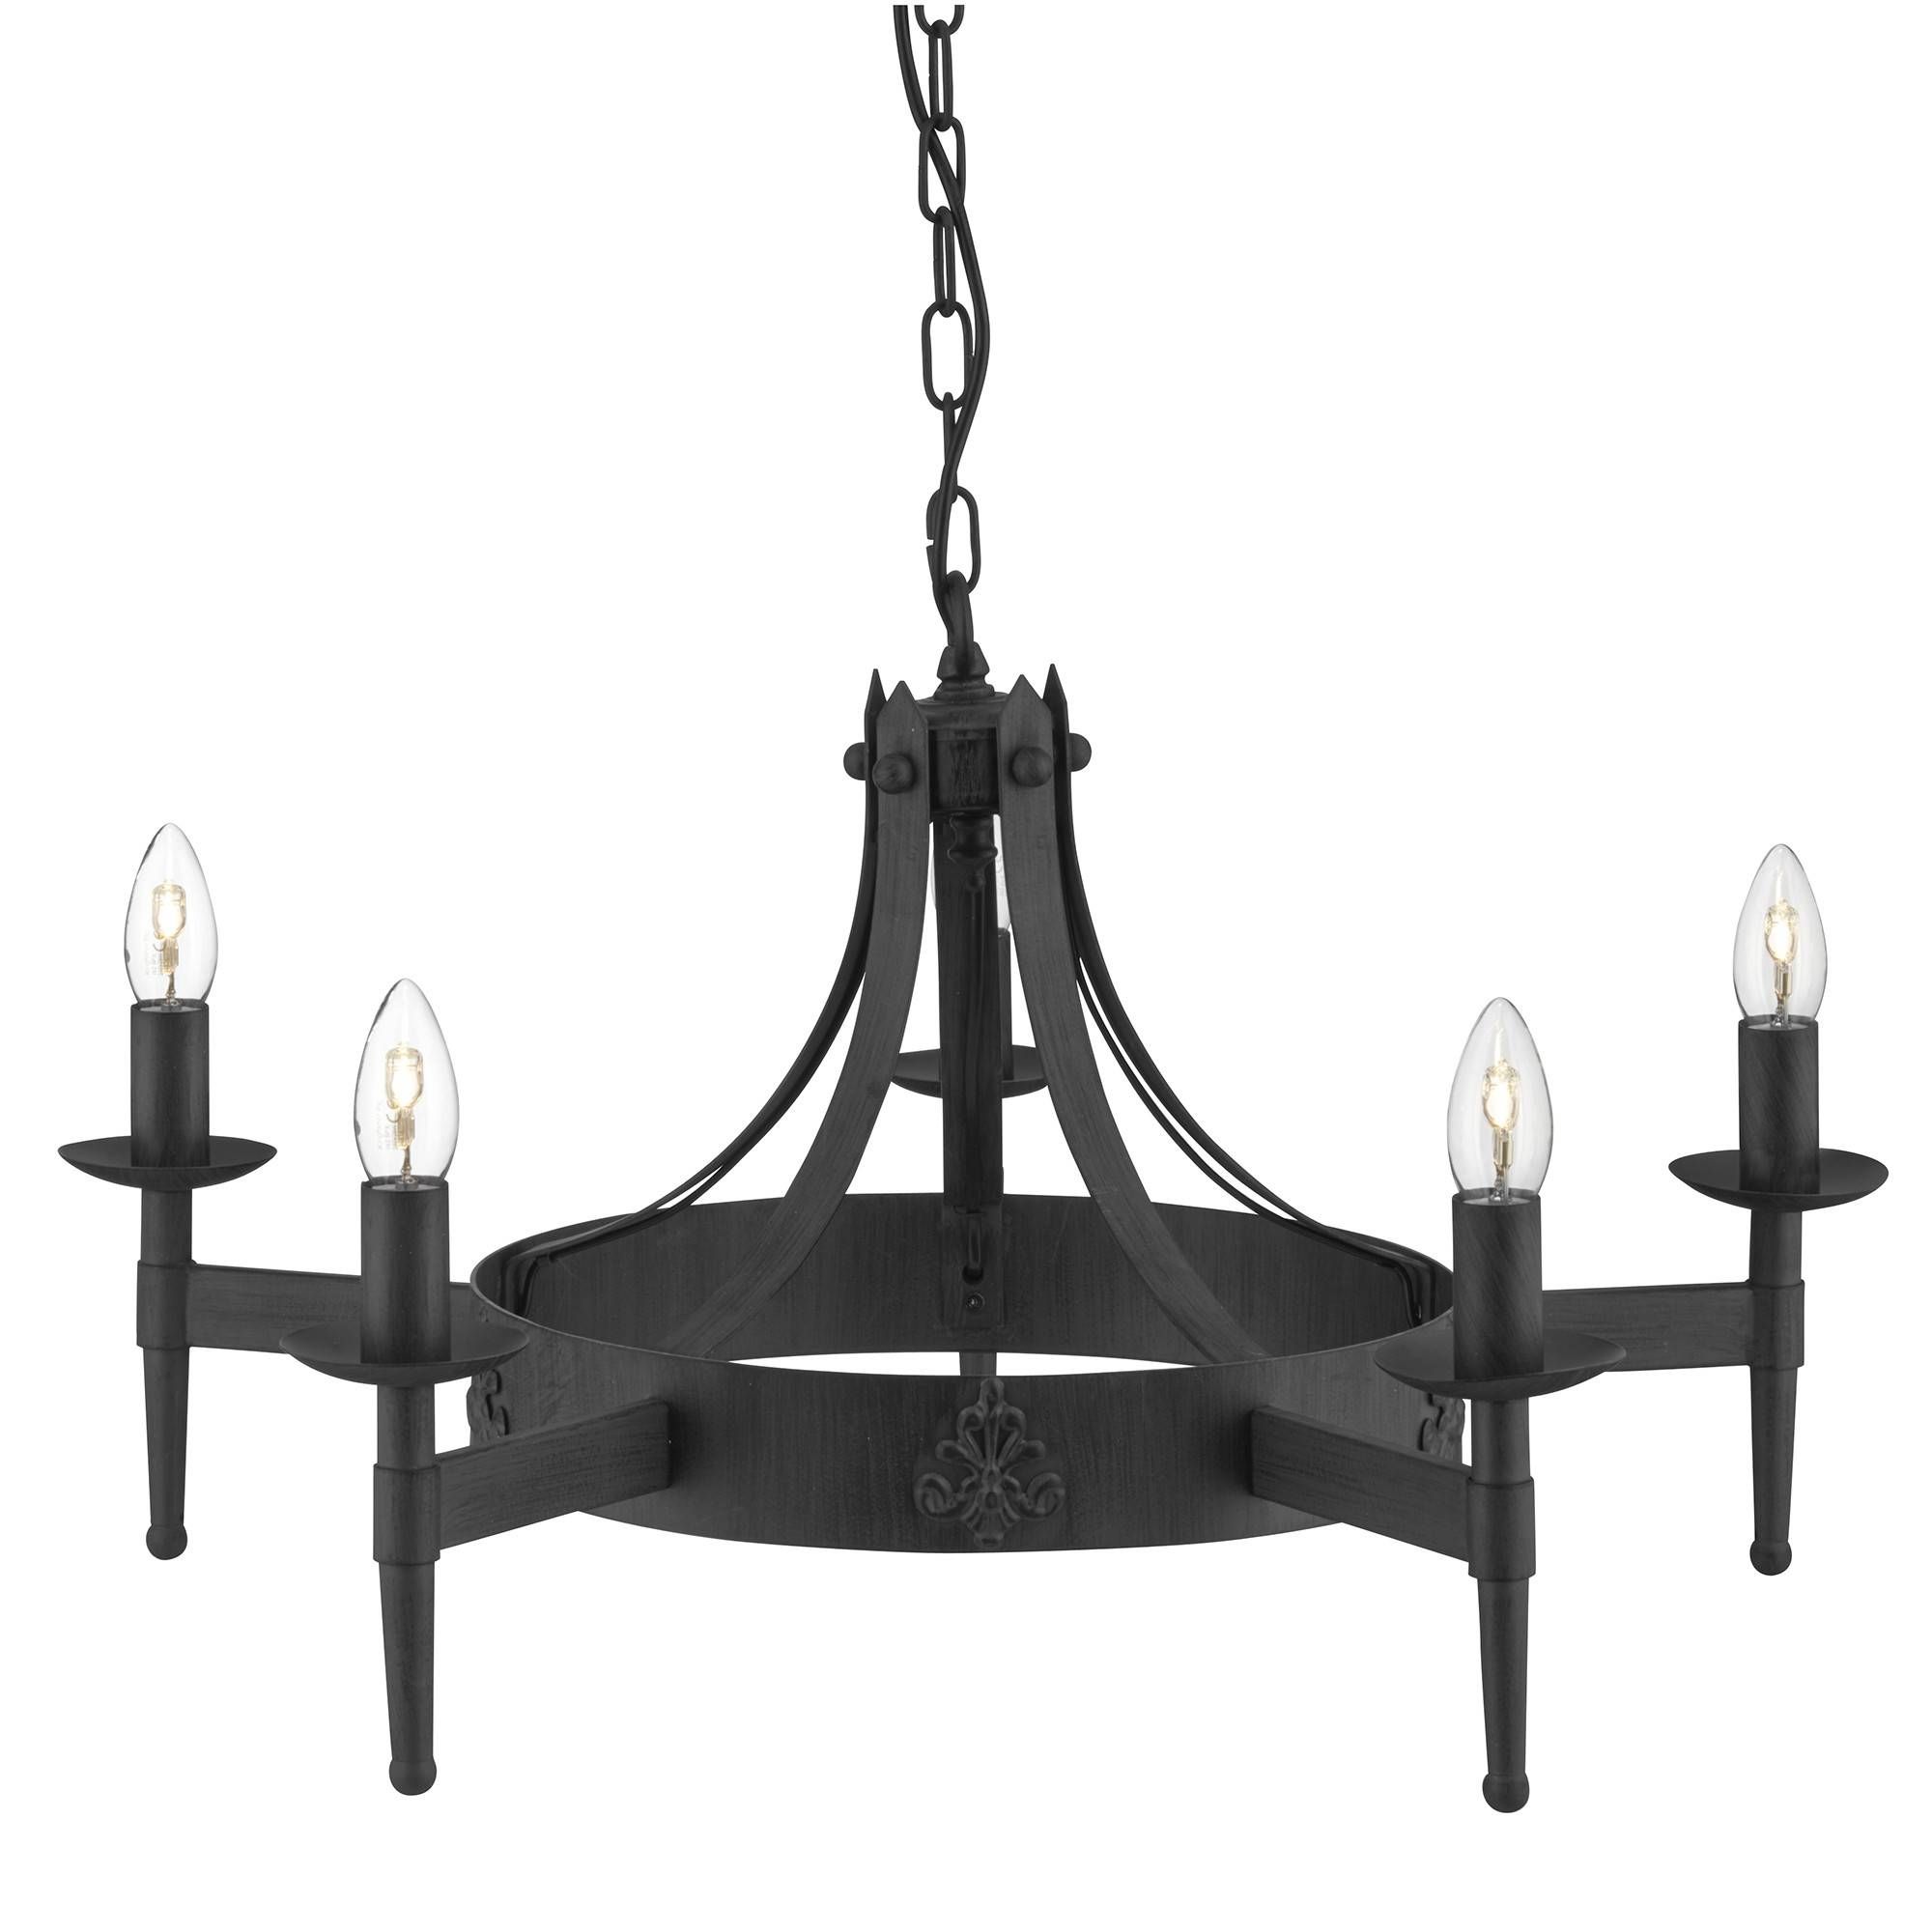 5 Light Fitting In Black Wrought Iron With Regard To Wrought Iron Lights Fittings (View 4 of 15)